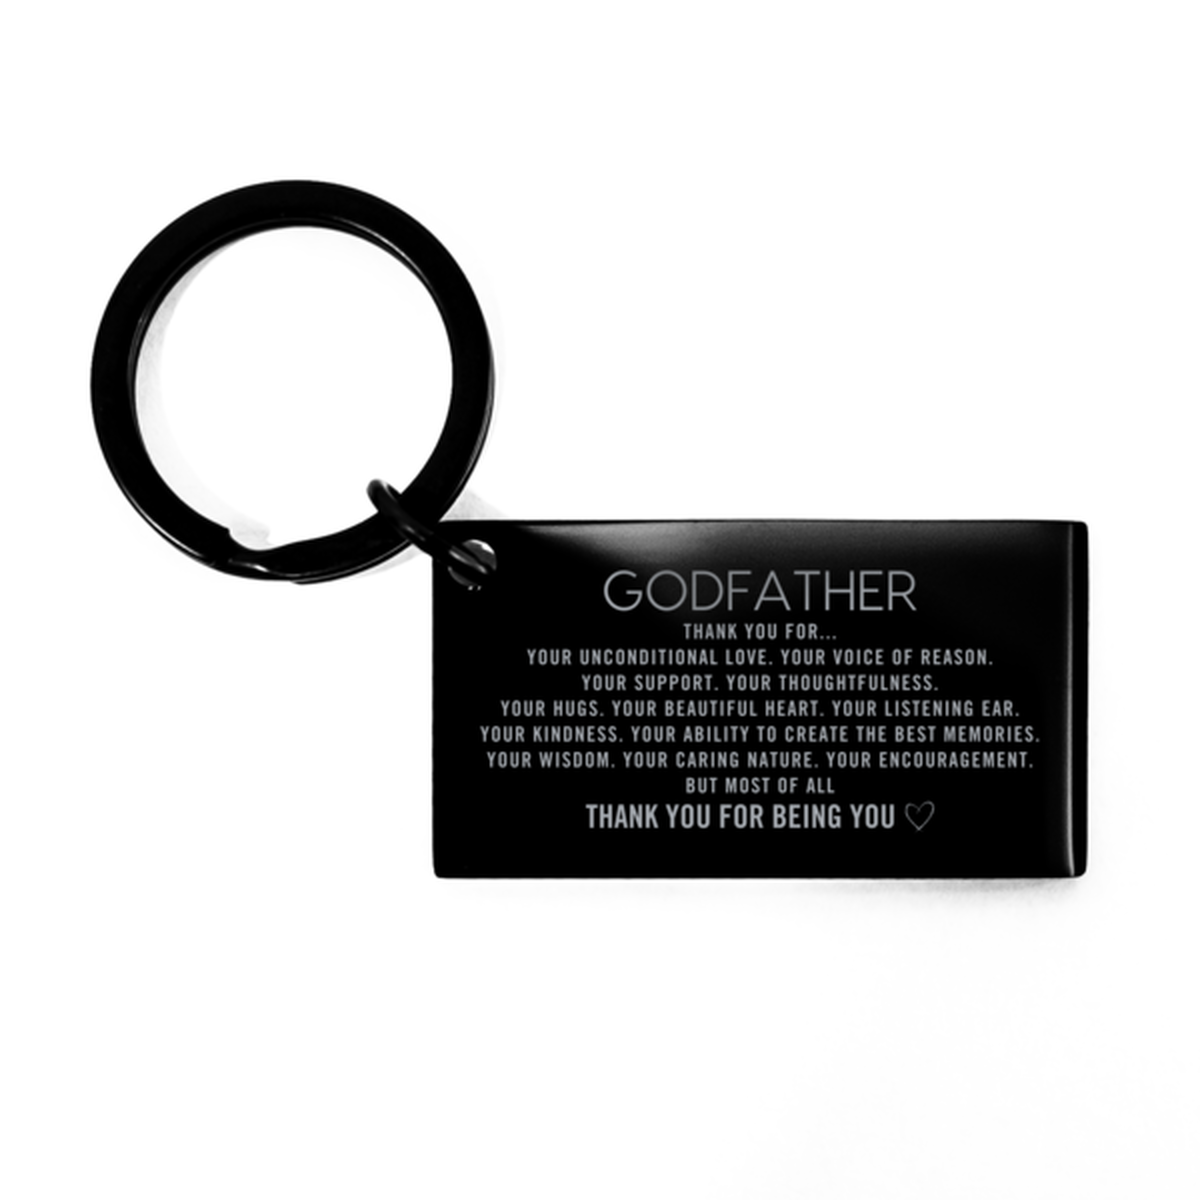 Godfather Keychain Custom, Engraved Gifts For Godfather Christmas Graduation Birthday Gifts for Men Women Godfather Thank you for Your unconditional love